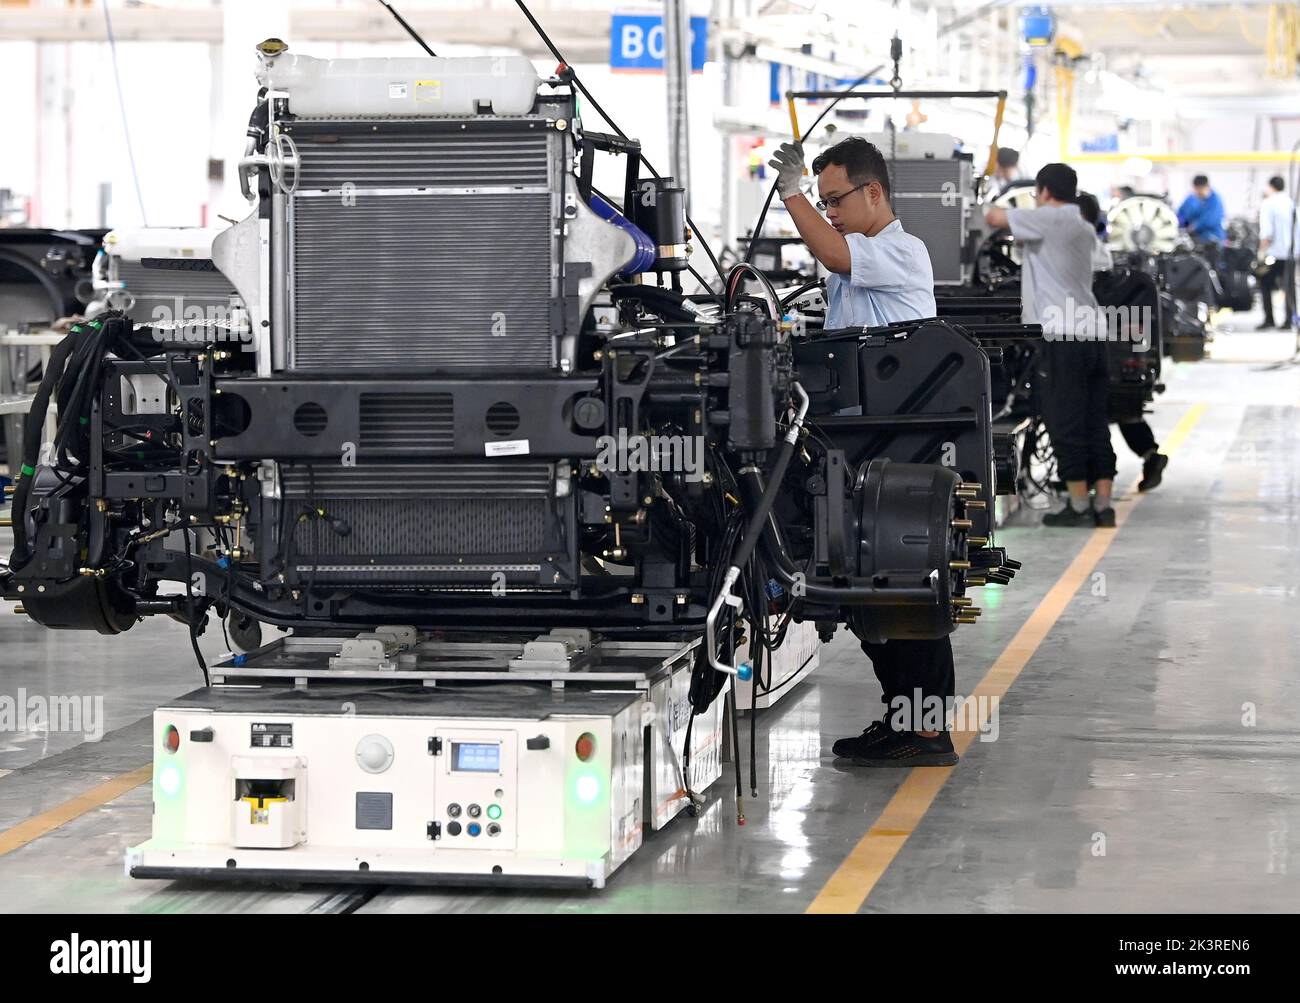 (220928) -- XI'AN, Sept. 28, 2022 (Xinhua) -- Employees work on the assembly line of the heavy truck capacity expansion project at the Shaanxi Automobile Holding Group in Xi'an, northwest China's Shaanxi Province, Sept. 27, 2022. Shaanxi Automobile Holding Group is a leading enterprise in equipment manufacturing in Shaanxi Province.   Since the beginning of this year, the overseas orders of Shaanxi Automobile have continued to grow. The heavy trucks produced here are exported to more than 130 countries and regions.    An expansion project is put into production recently to boost the capacity. Stock Photo